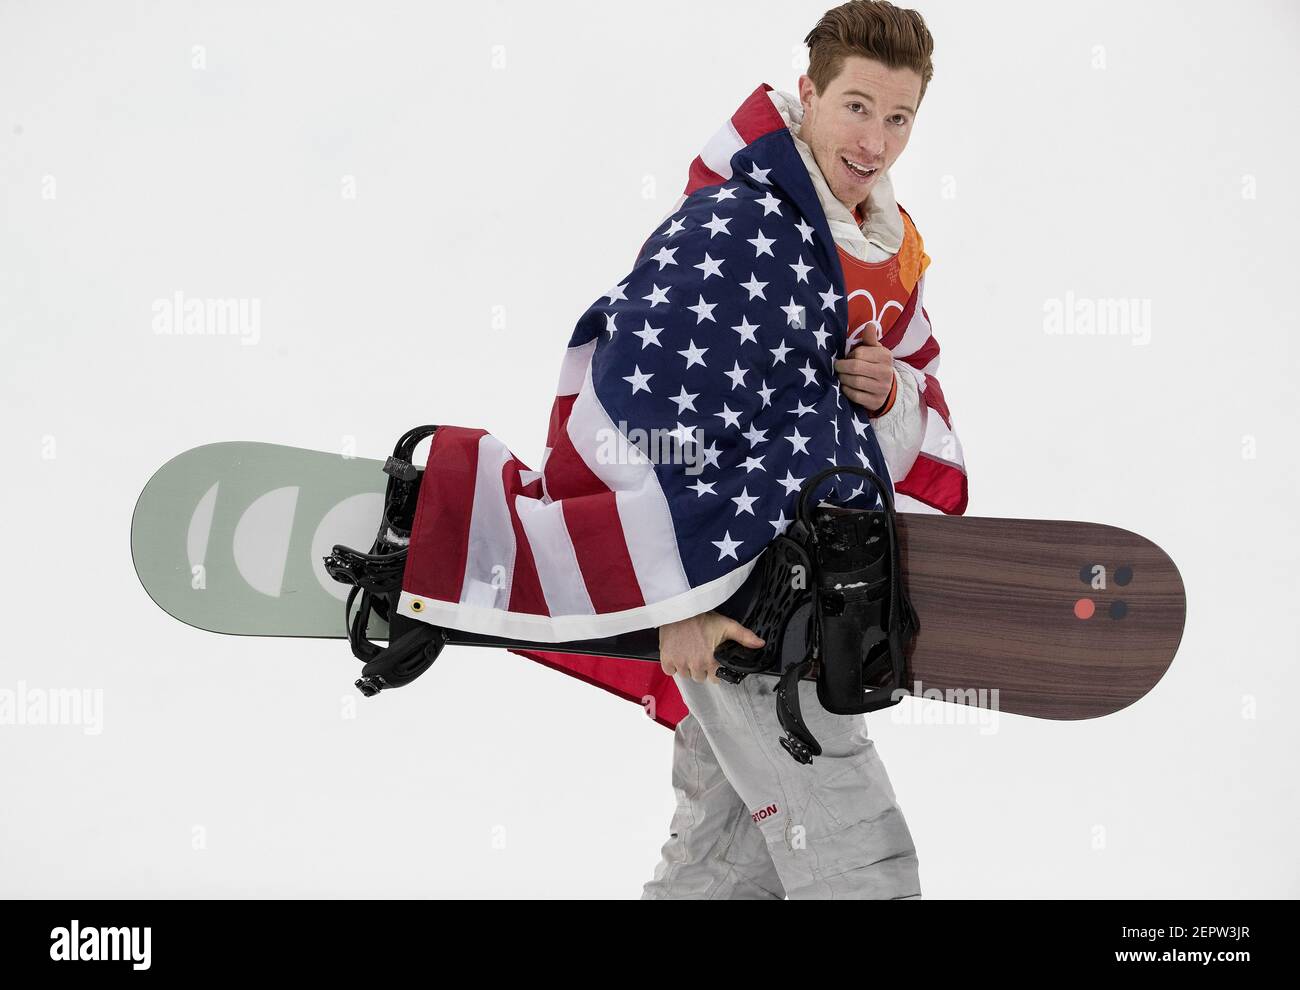 Shaun White celebrates after winning the gold medal in the Men's Half Pipe Snowboard finals at Phoenix Park in South Korea on Wednesday, Feb. 14, 2018, during the Pyeongchang Winter Olympics. (Photo by Carlos Gonzalez/Minneapolis Star Tribune/TNS/Sipa USA) Stock Photo